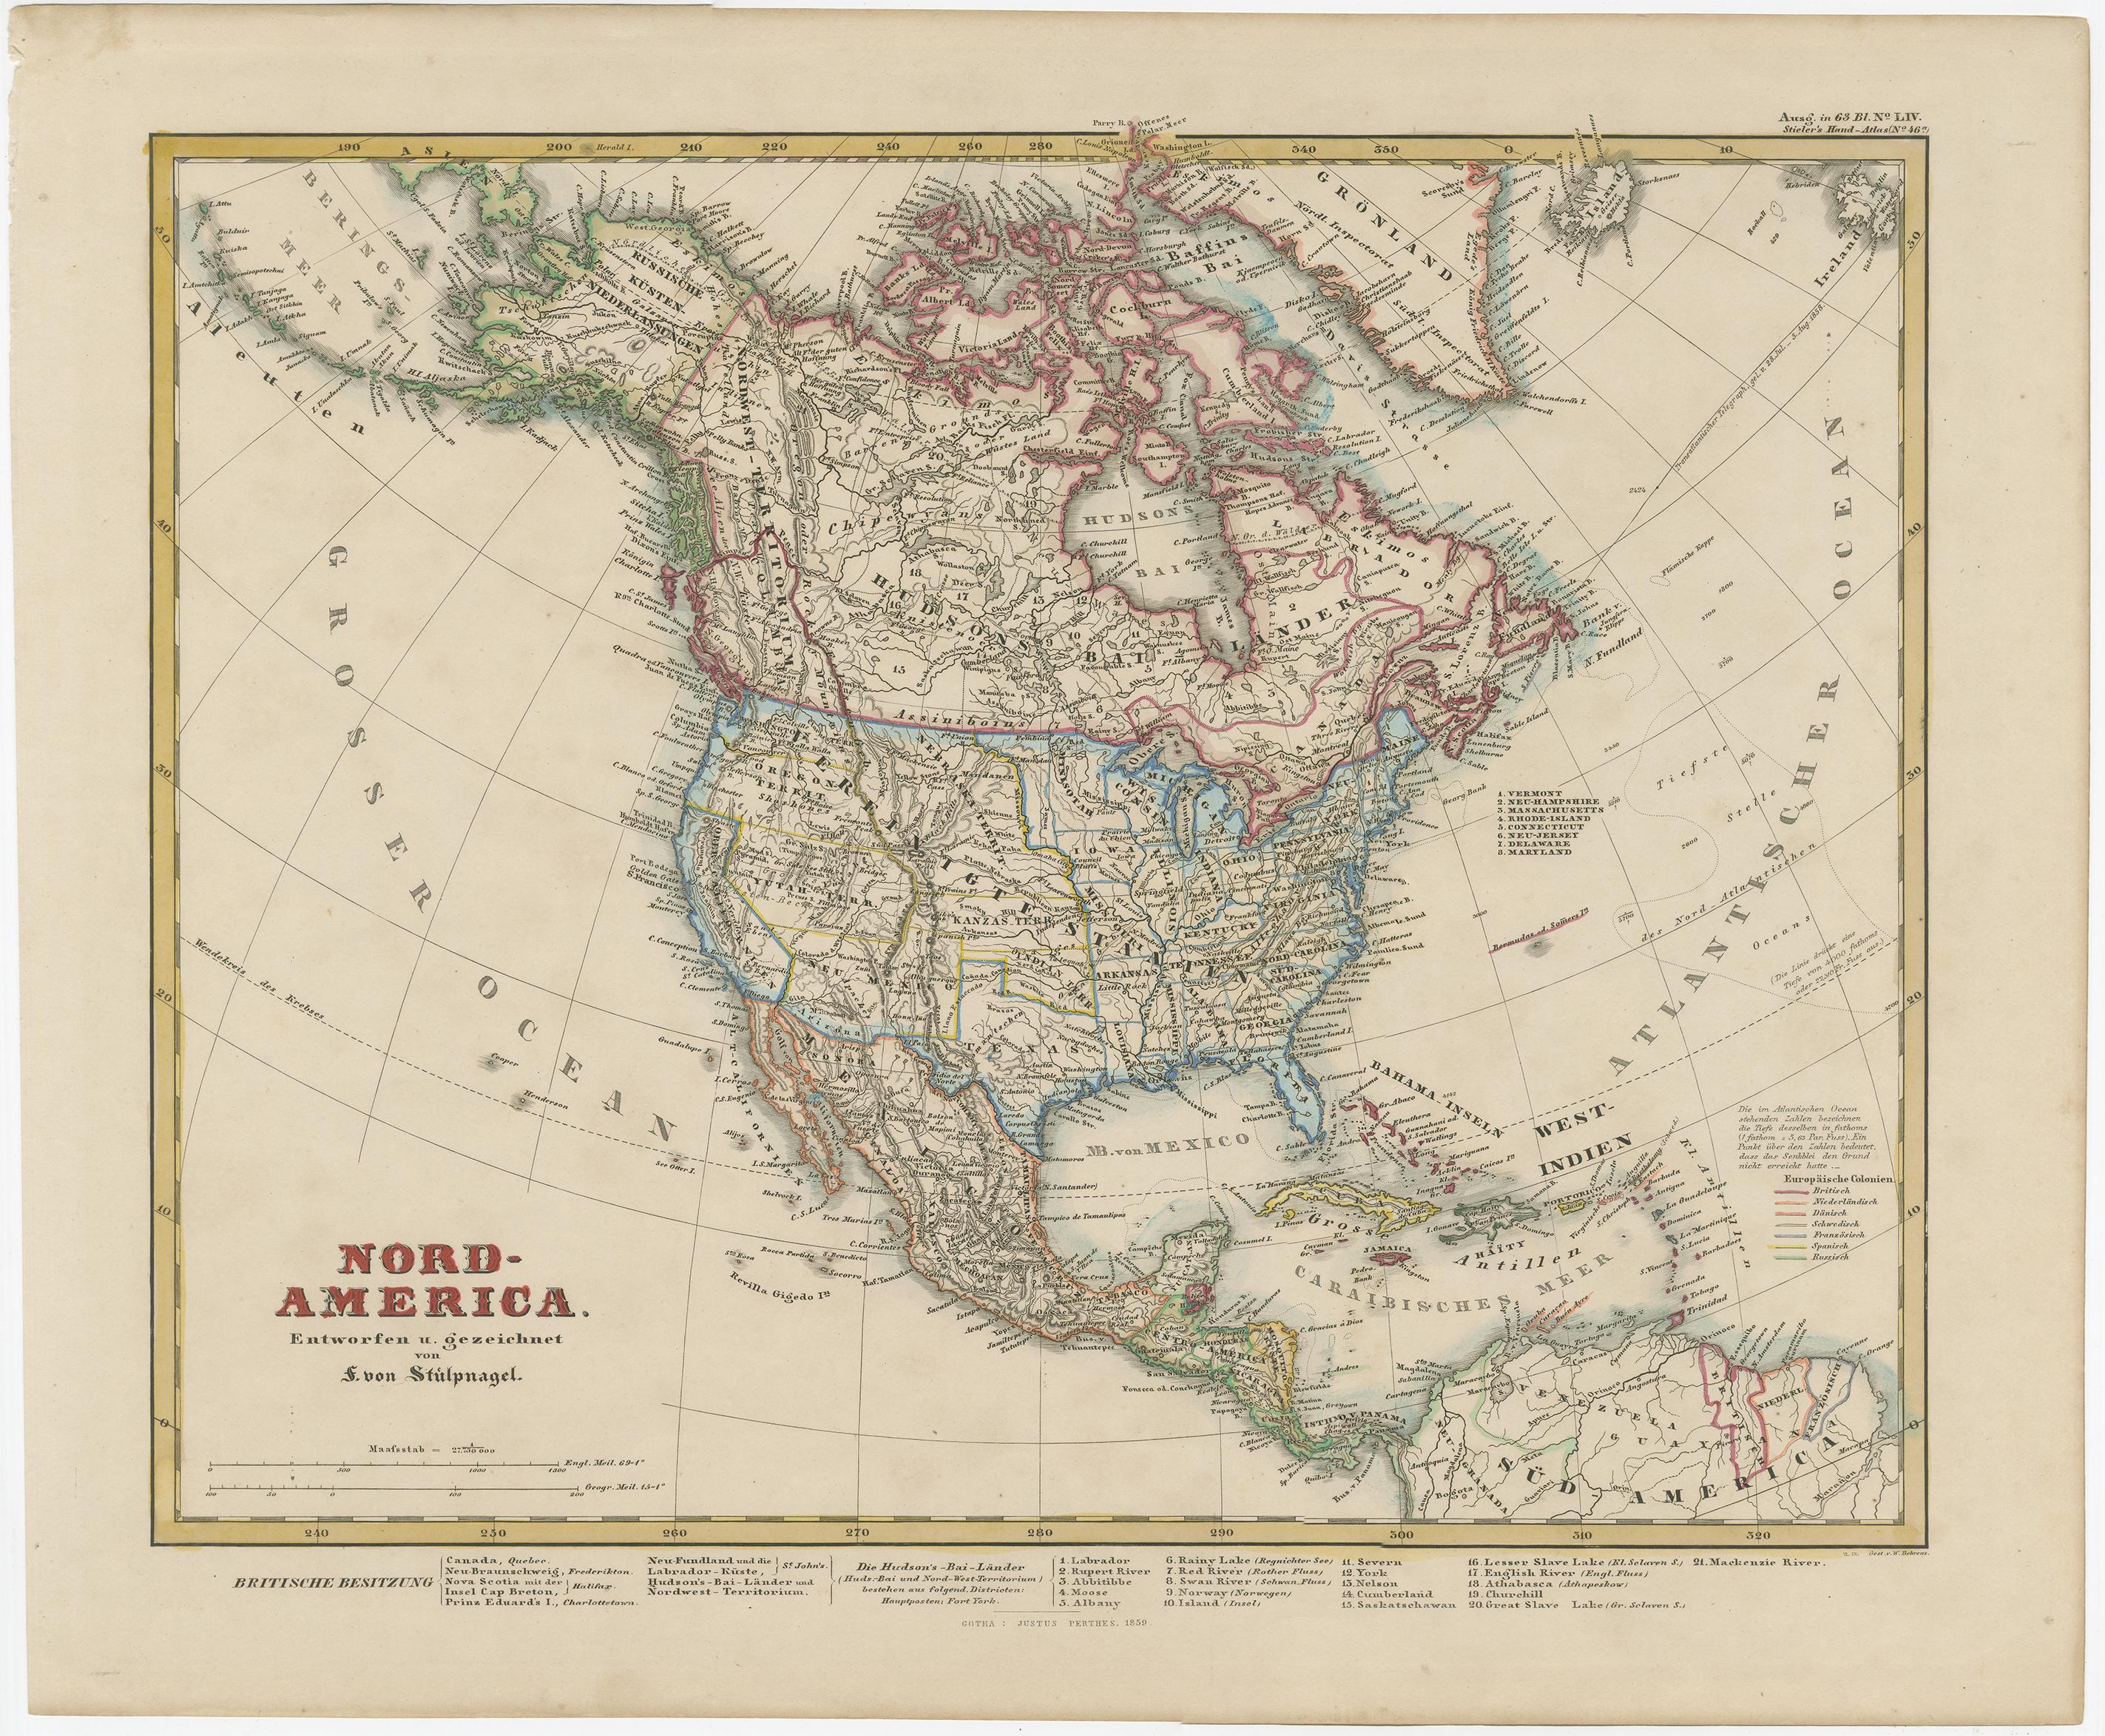 Original antique map titled 'Nord-America'. Old map of North America and the West Indies. Also showing British Overseas Territories and Hudson Bay. 

This map originates from Stielers Handatlas, published circa 1859. Stielers Handatlas (after